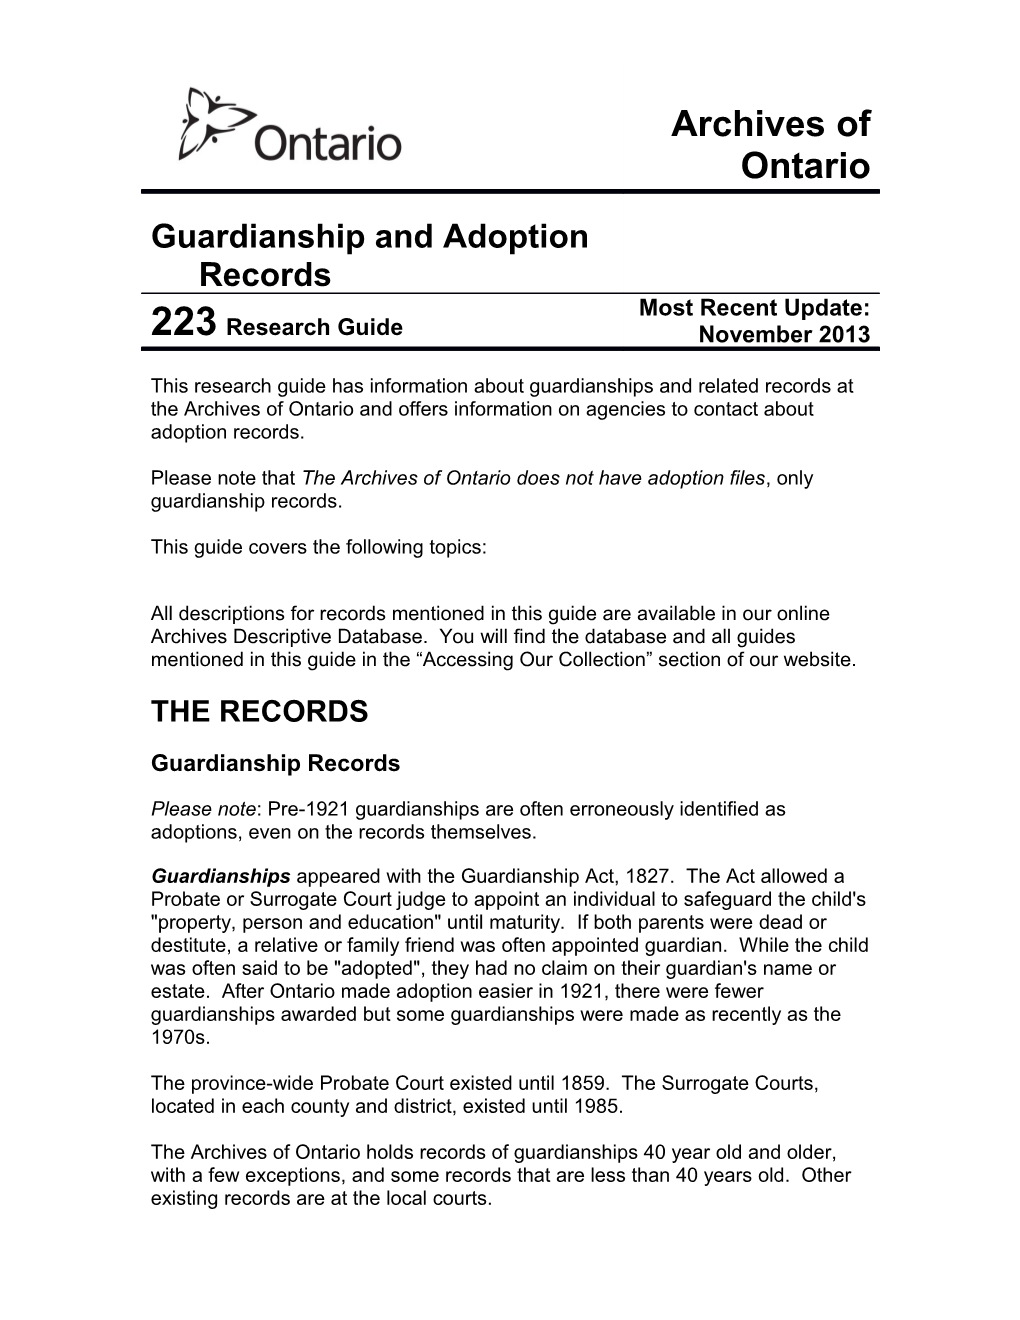 Research Guide XX: Guardianship and Adoption Records